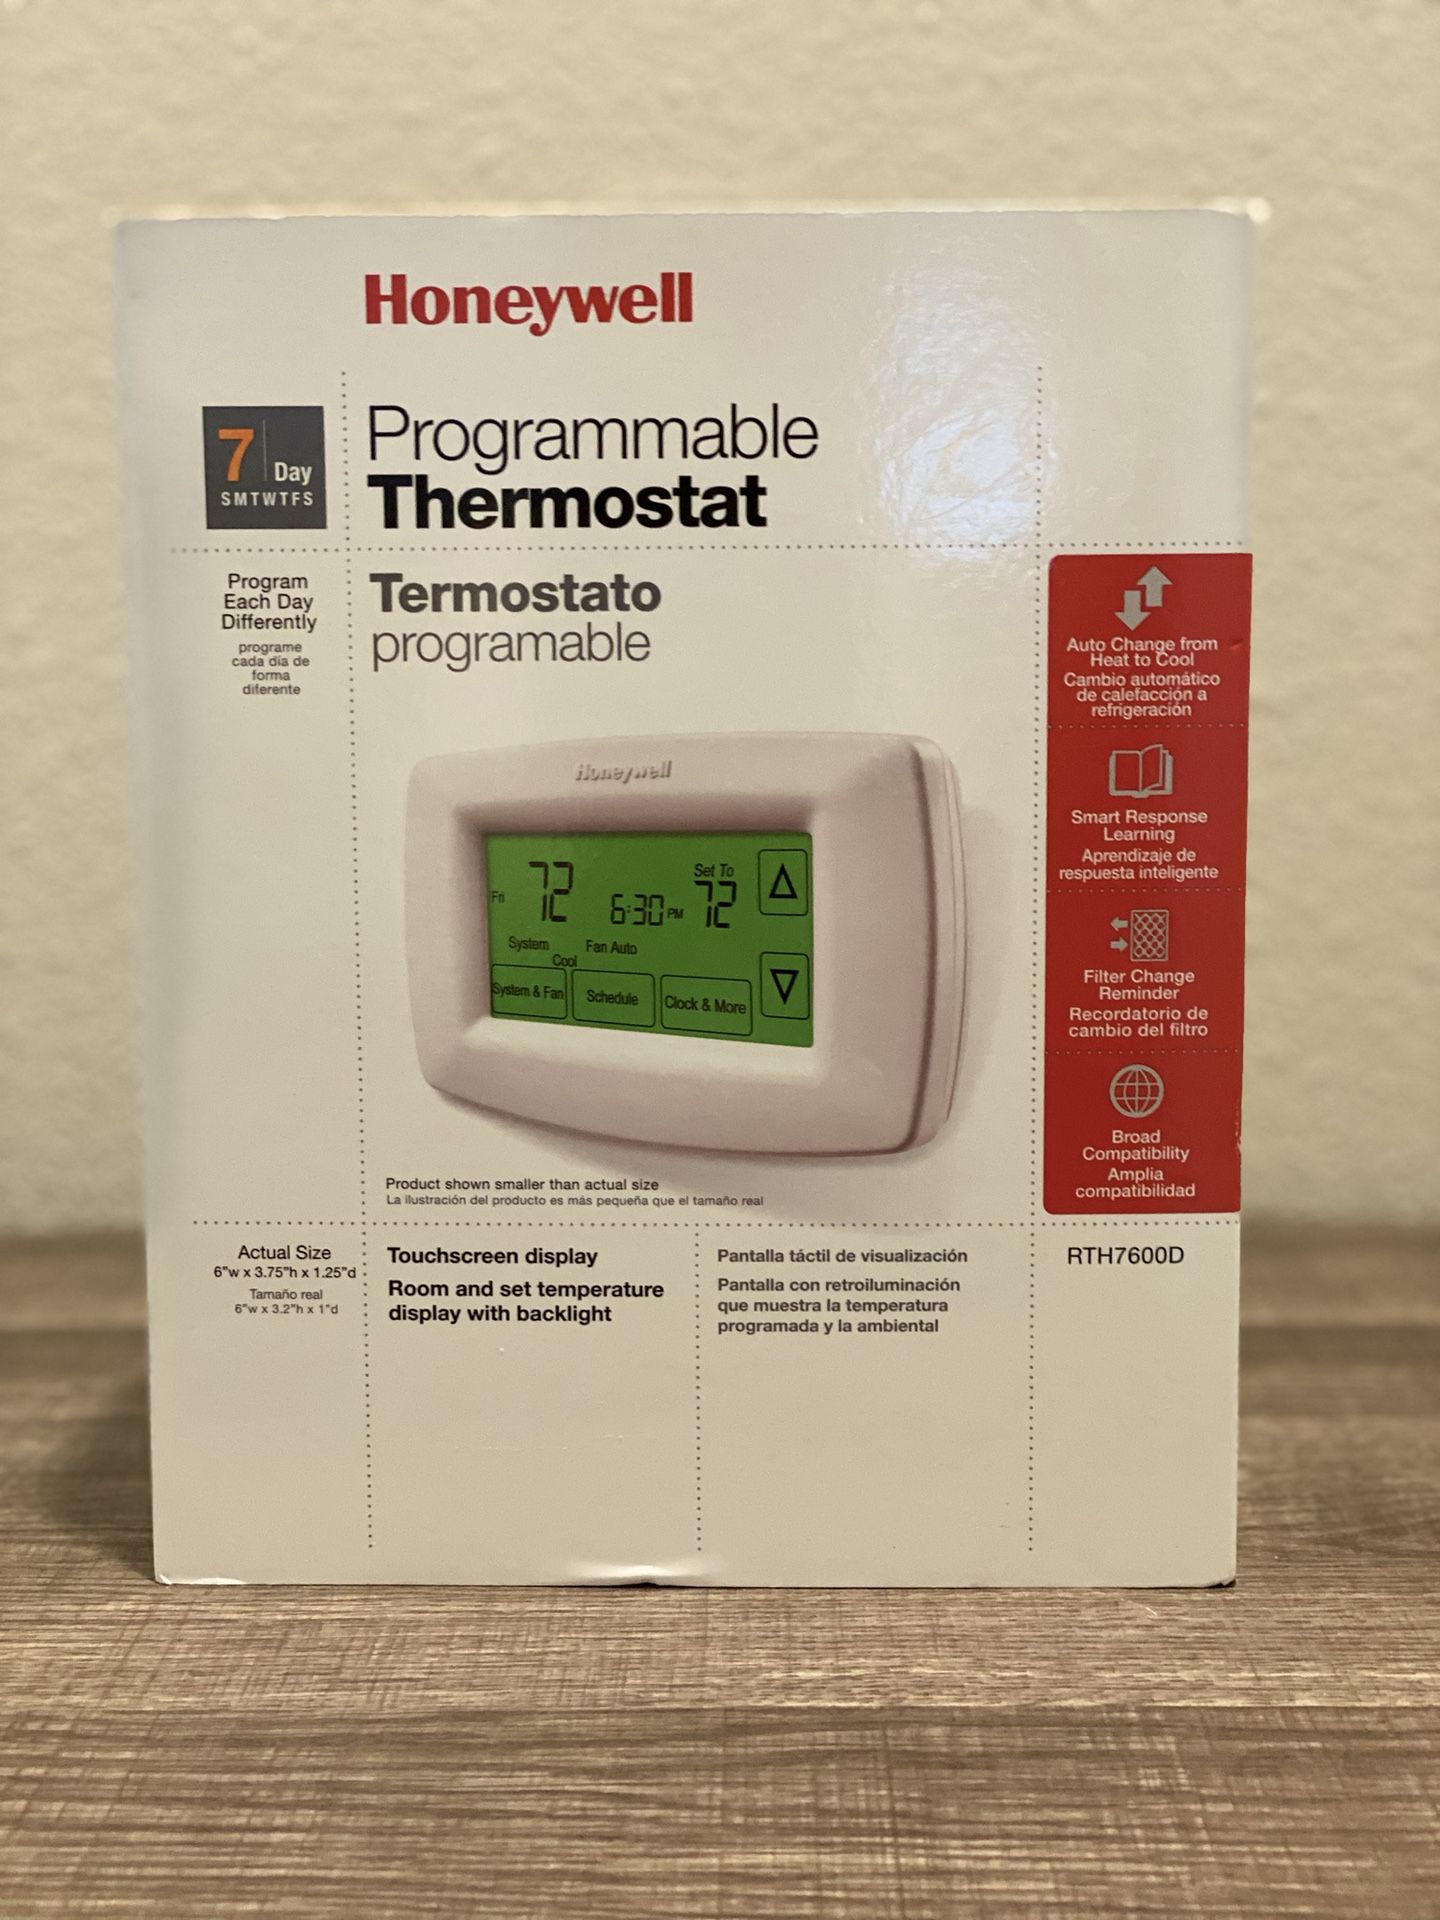 Two Honeywell Programmable Thermostat 7 Day